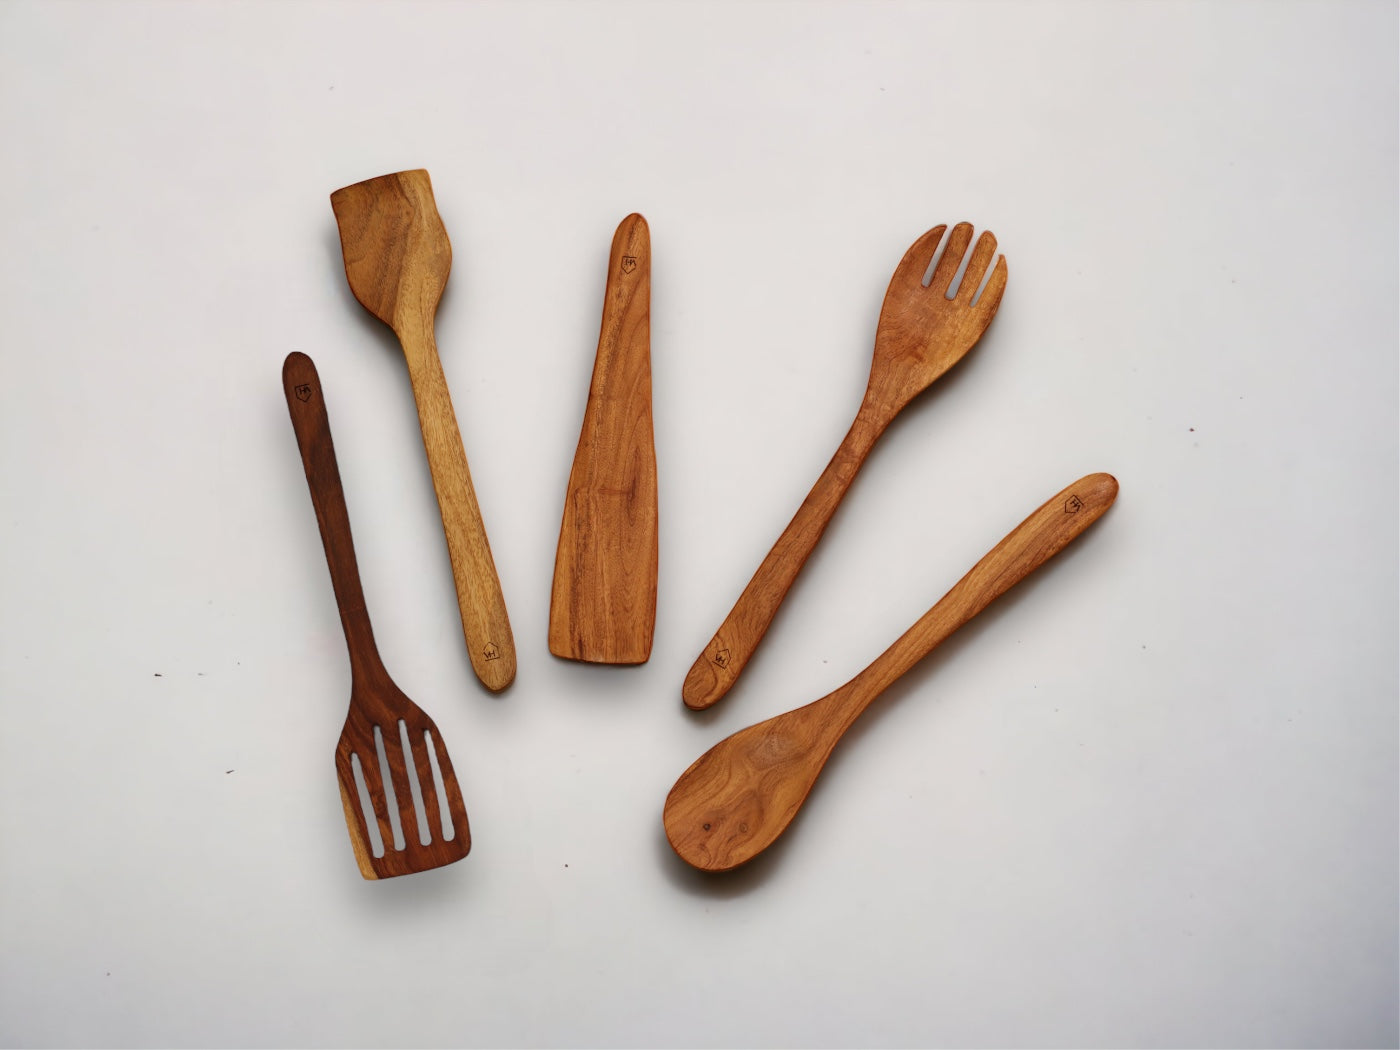 Neem Wood Kitchen Cooking Spoons Set of 5